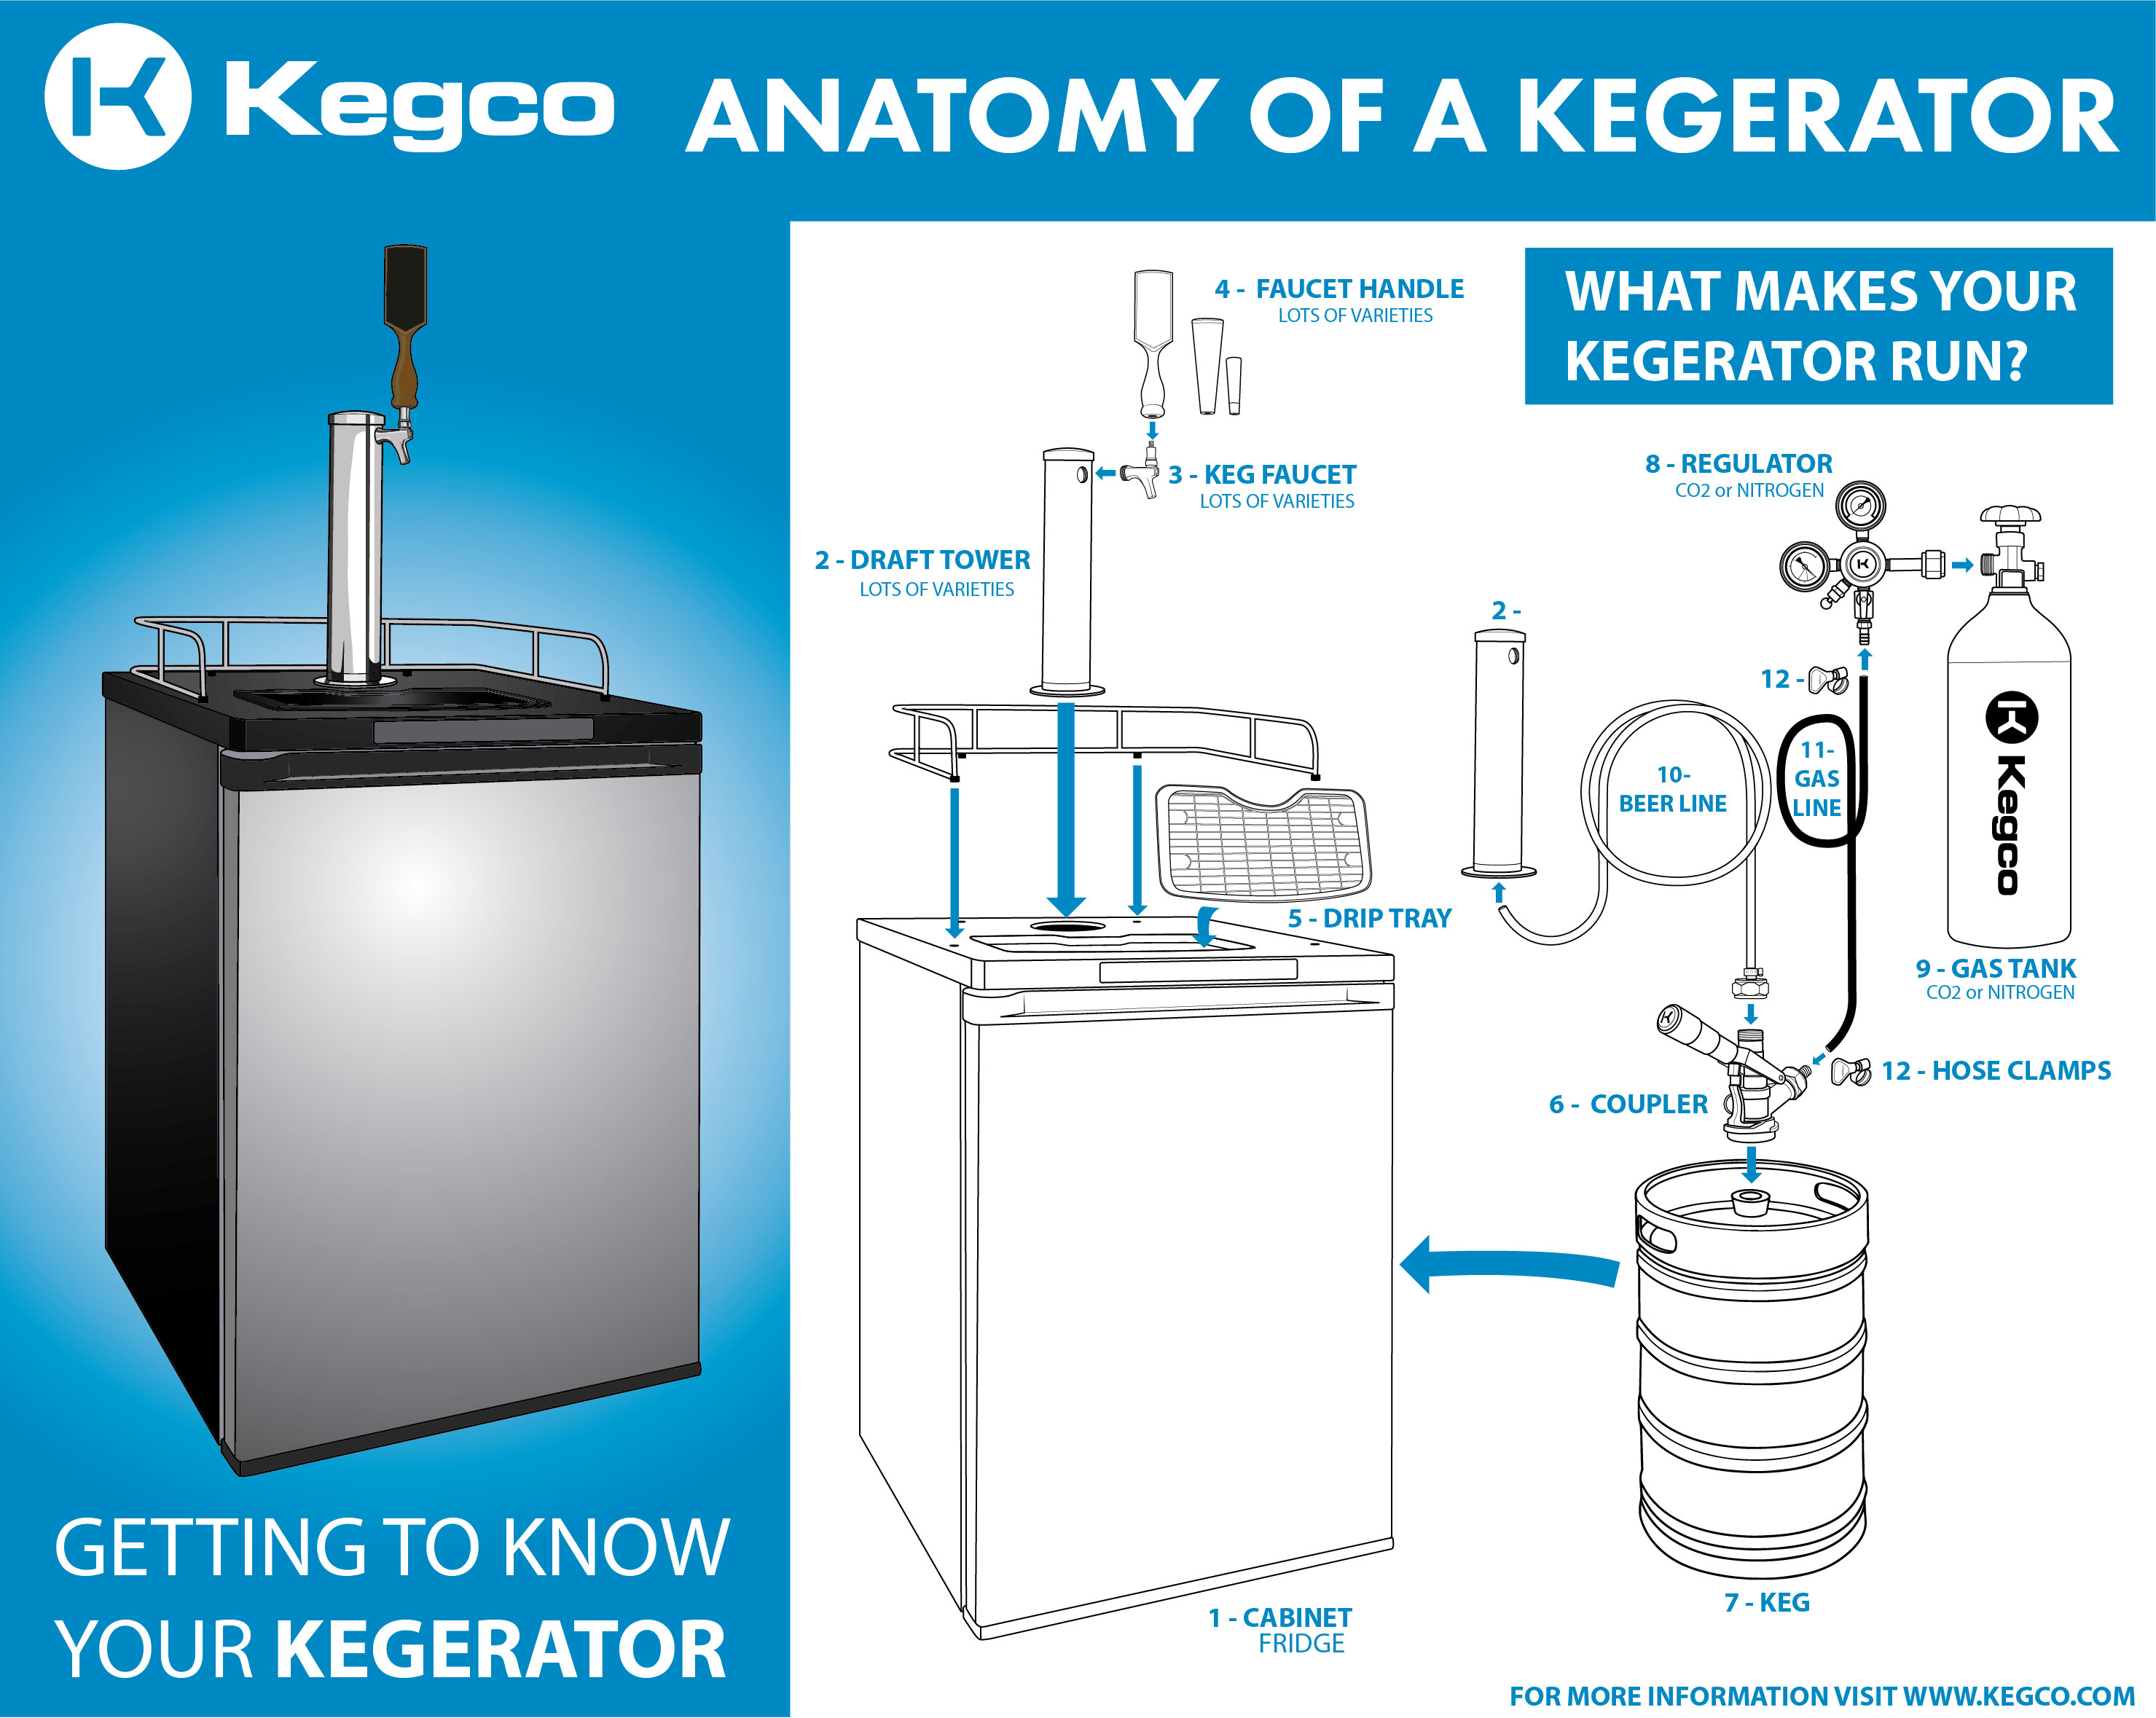 The Anatomy Of A Kegerator - How Does A 